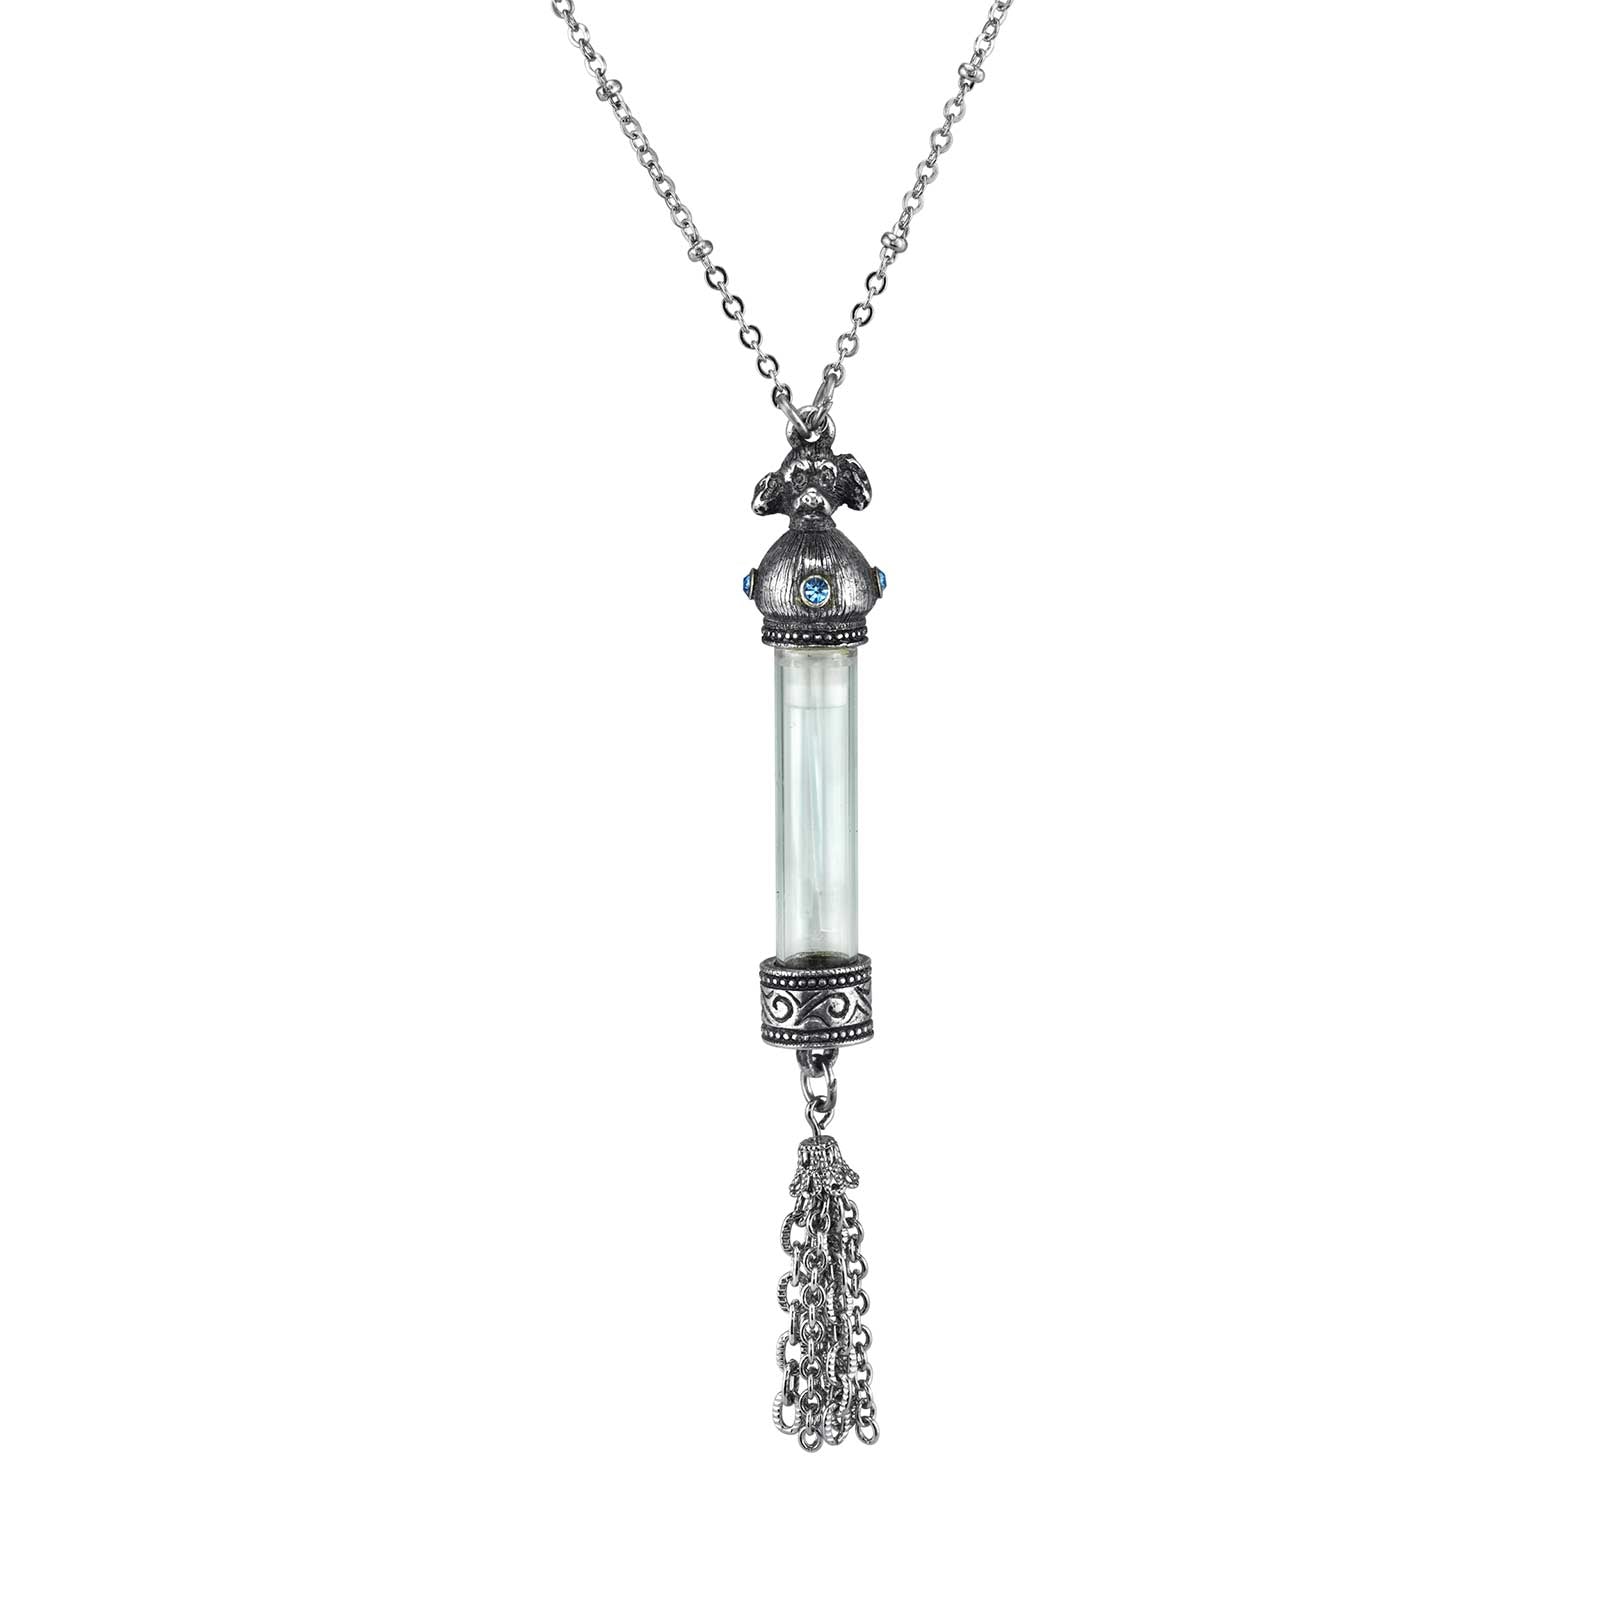 Pewter Blue Crystal Dog Vial With Tassle Necklace 30in